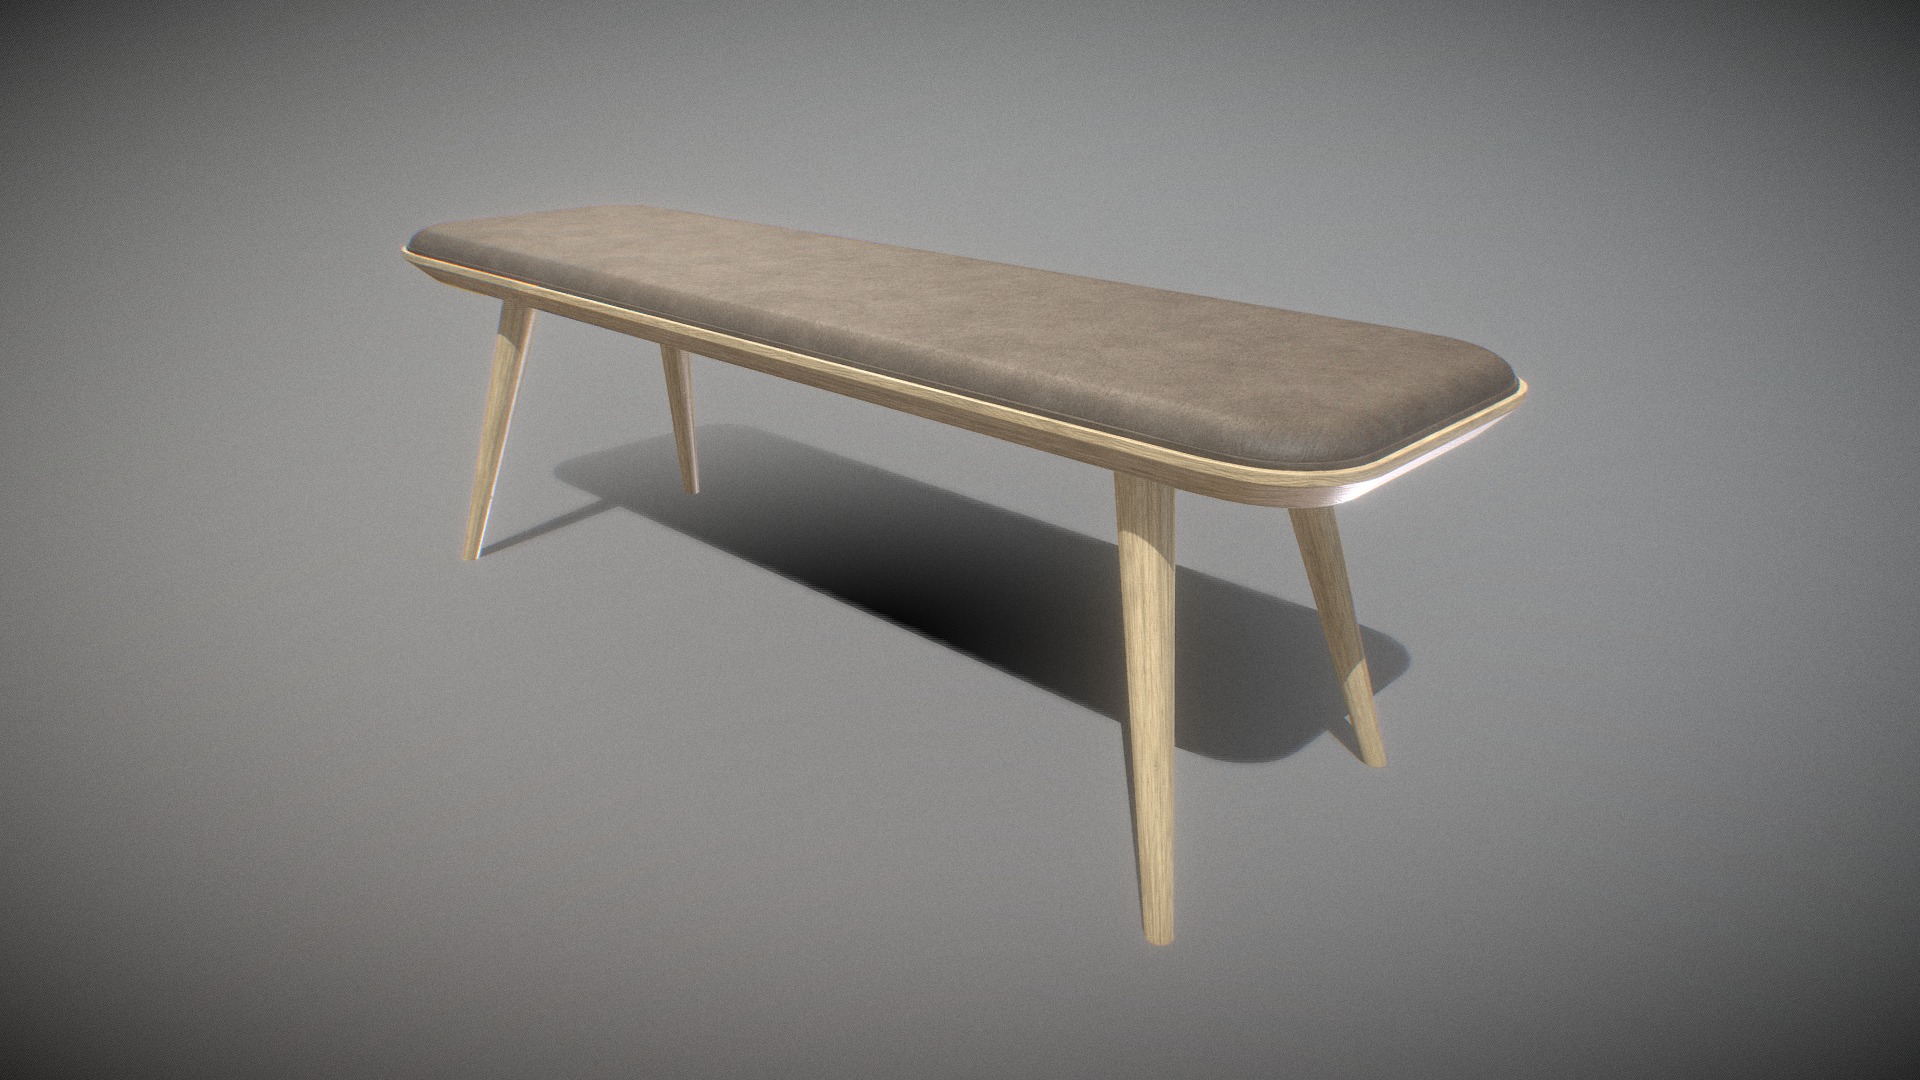 3D model Spine Wood Base Bench-Model 1717 v-01 - This is a 3D model of the Spine Wood Base Bench-Model 1717 v-01. The 3D model is about a wooden table on a grey background.